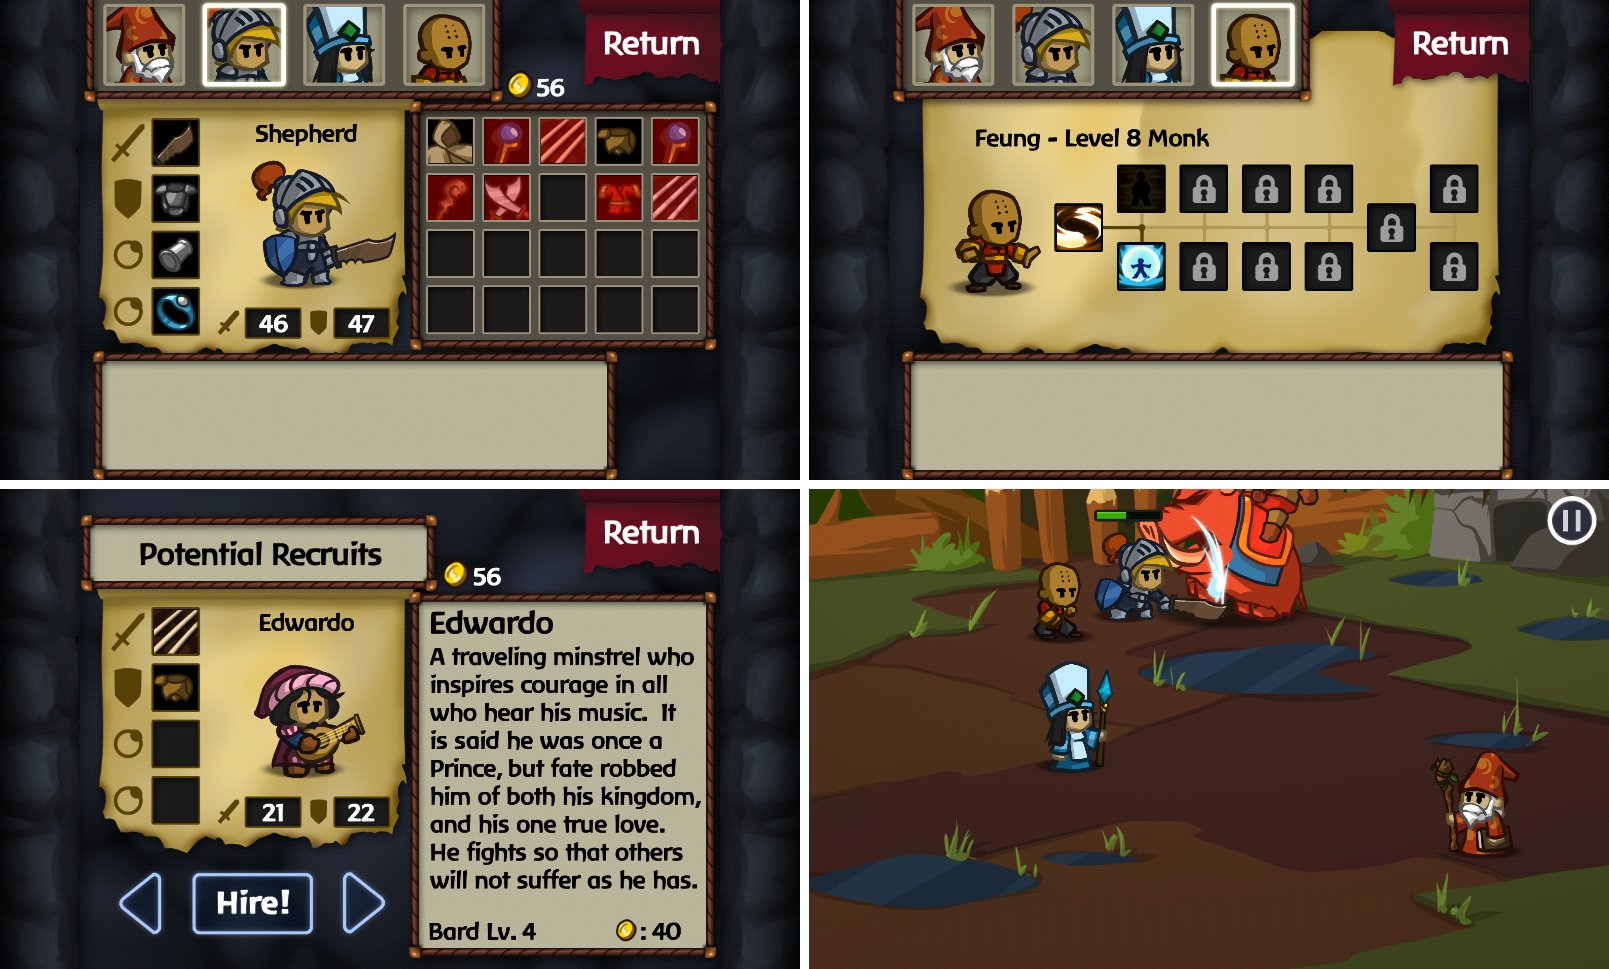 The 8 Best Role-Playing Games for Android